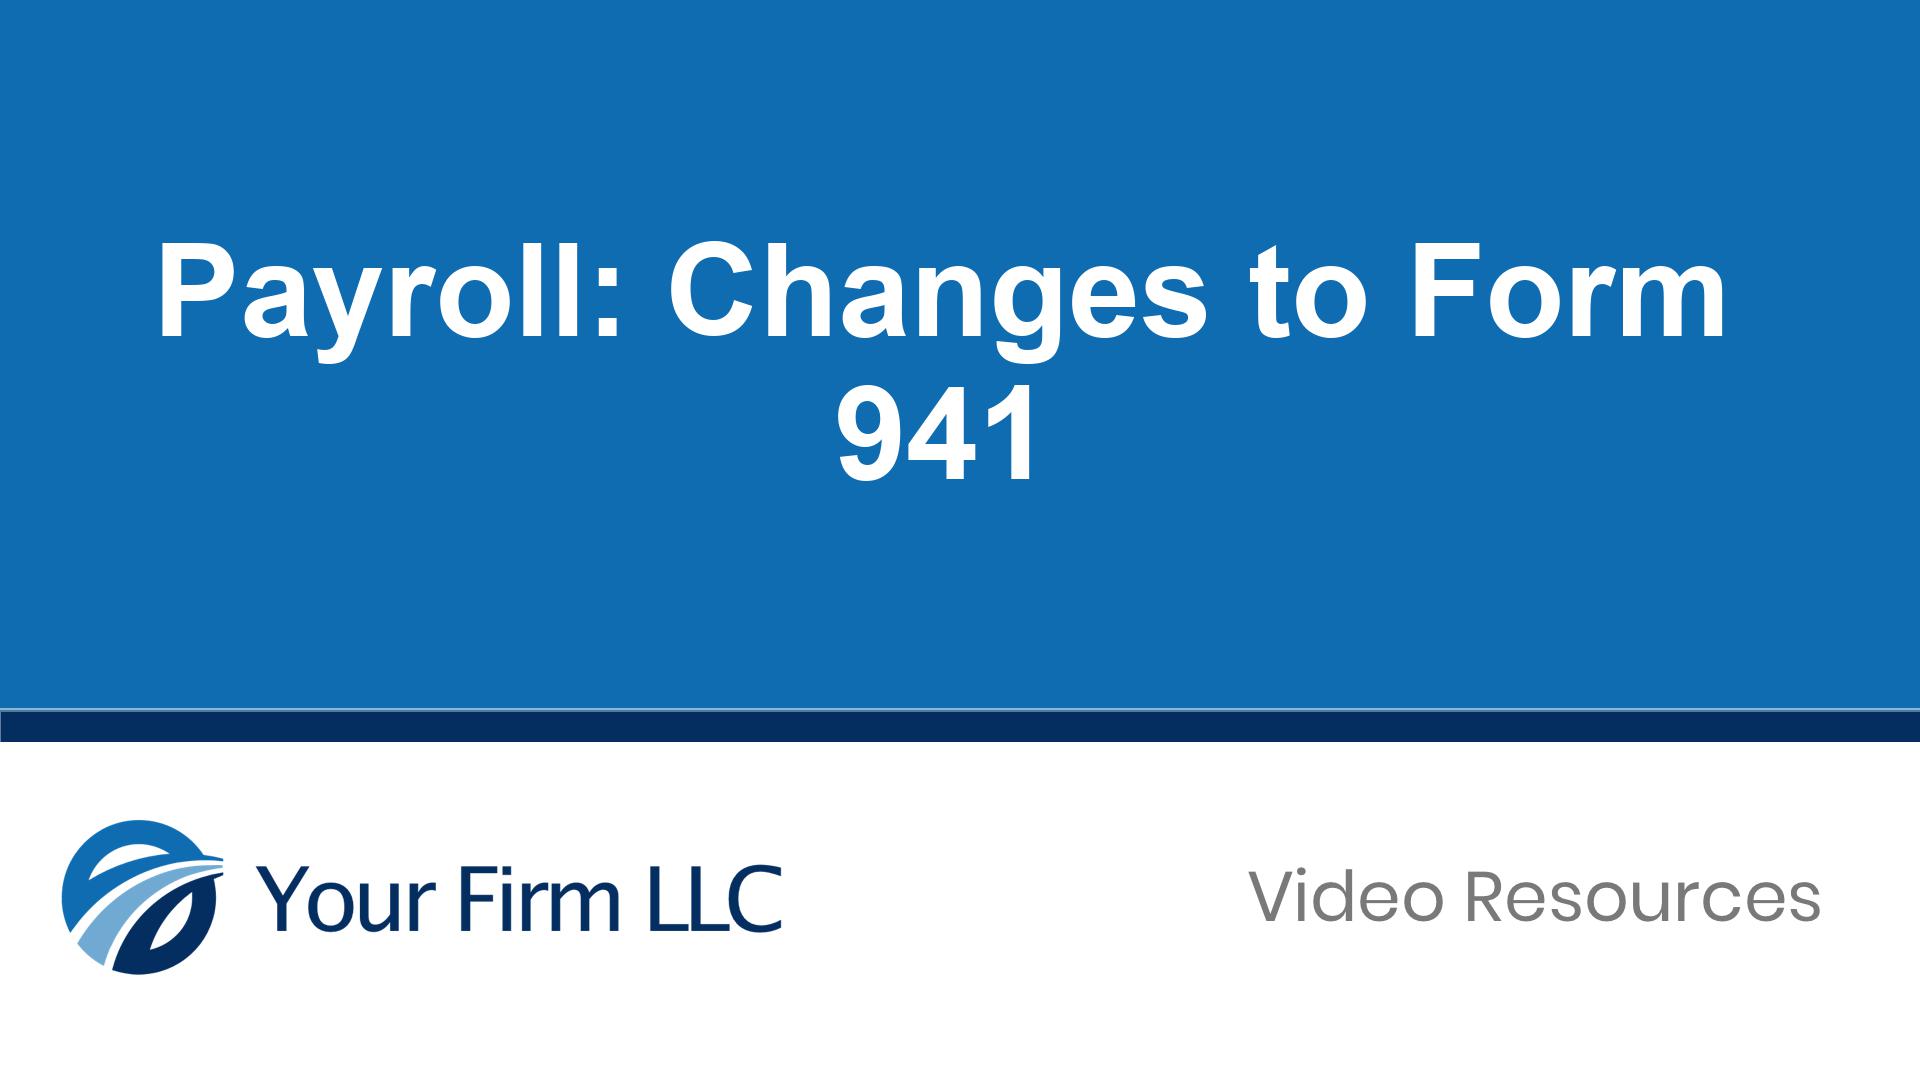 Payroll: Changes to Form 941